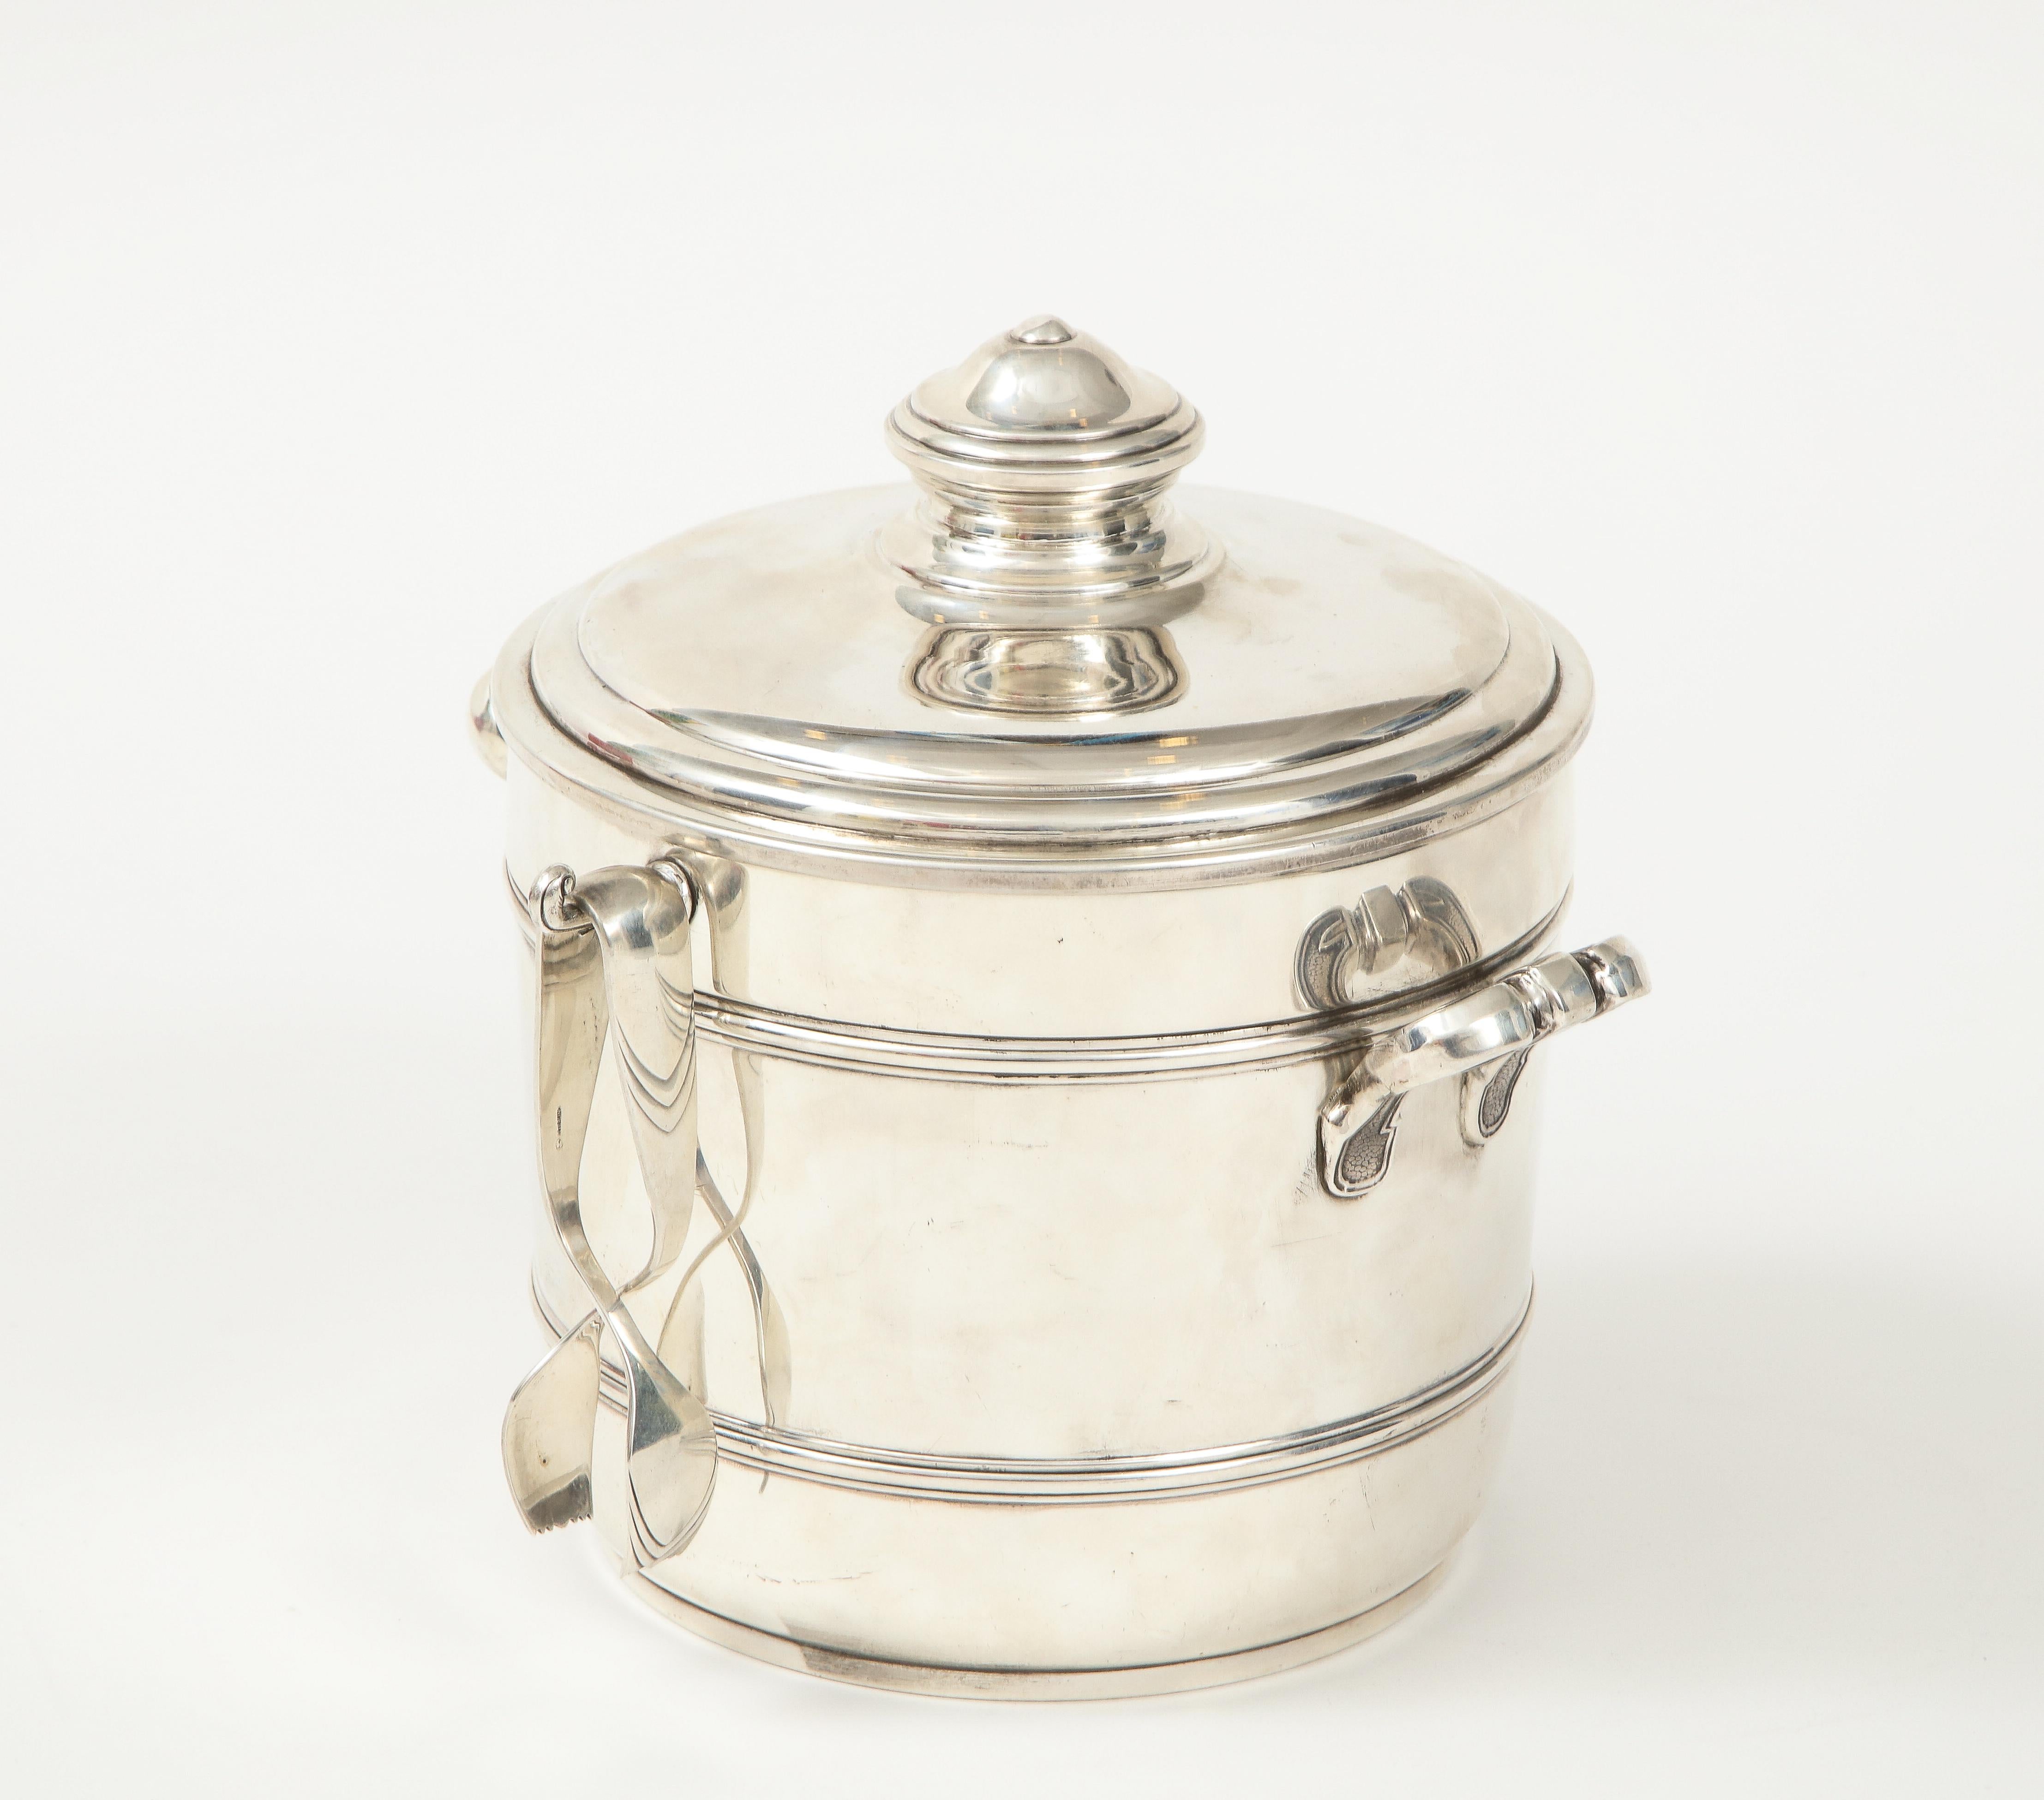 A fabulous Cartier sterling silver ice bucket with tongs with its original box. It has a perforated insulated liner that allows for moisture to escape therefore in impeccable condition.